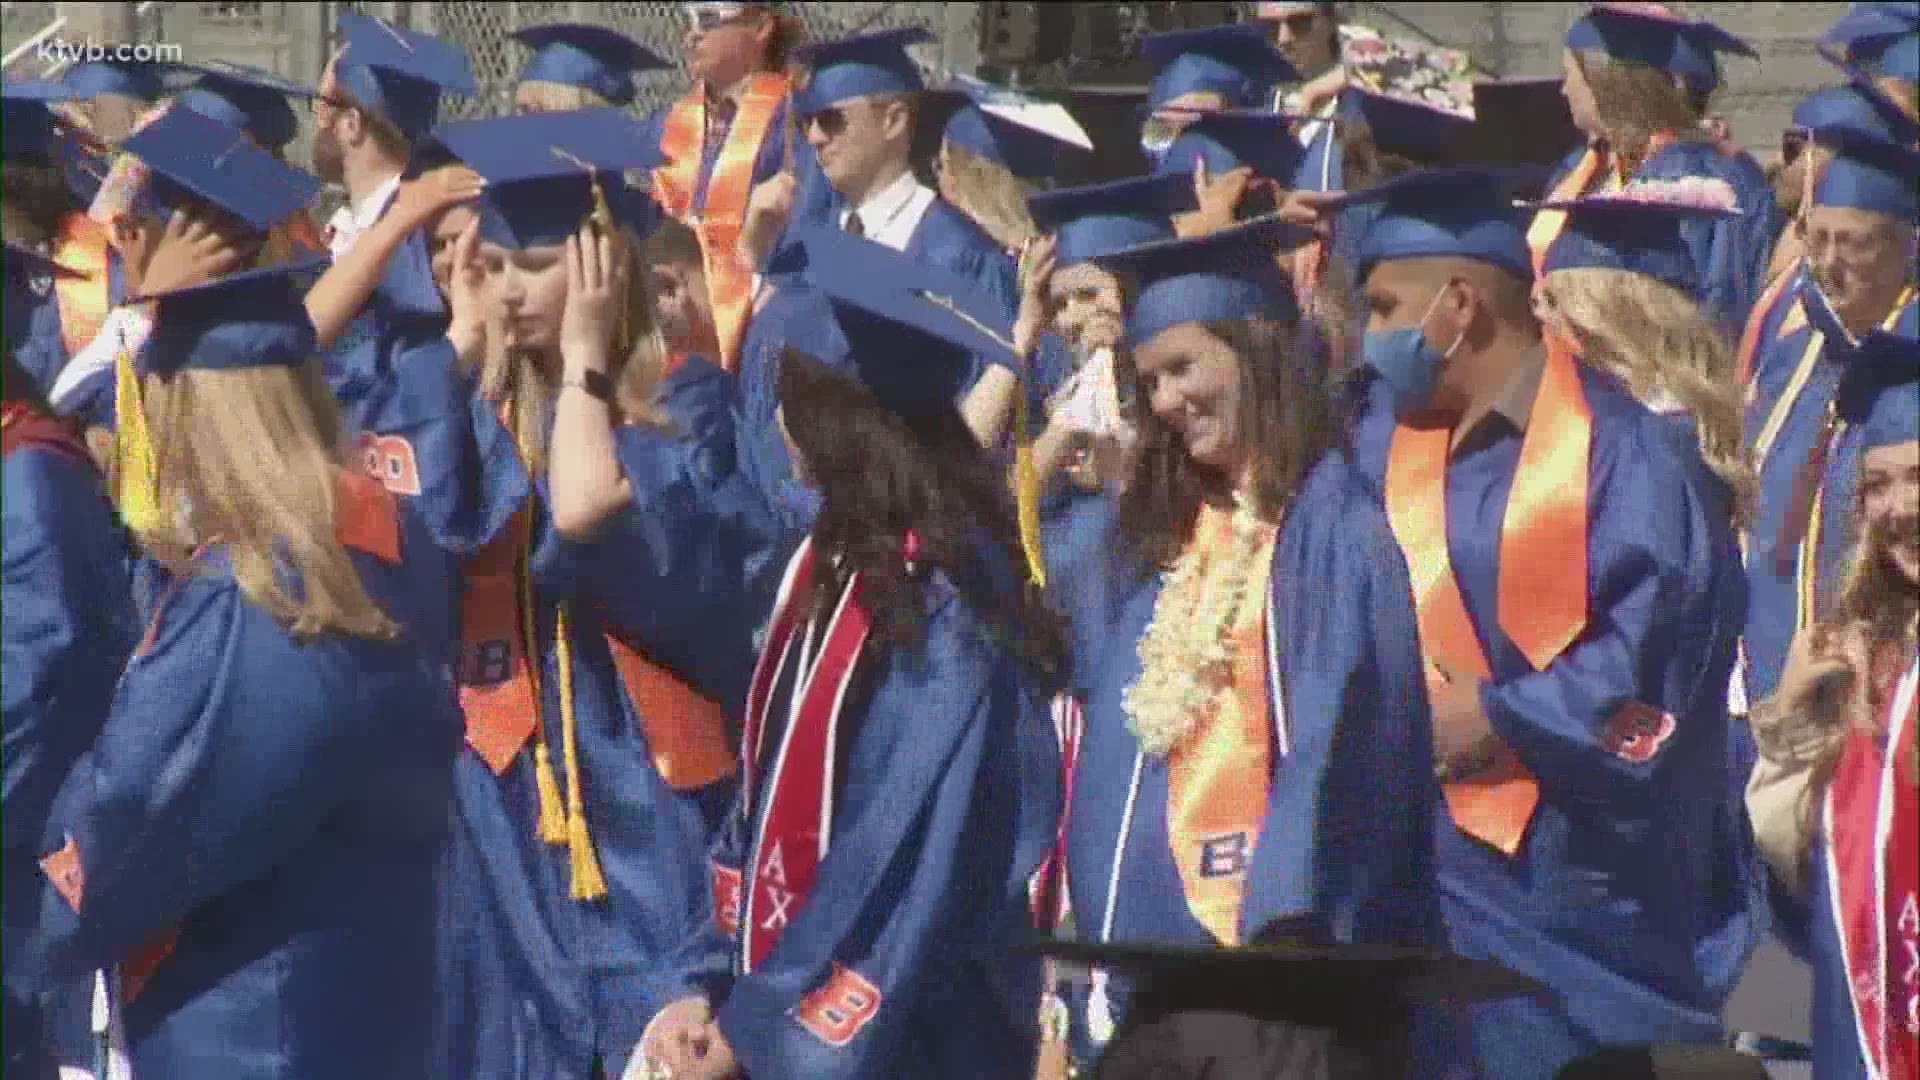 Graduates from the Class of 2020 will get to walk across the stage at Albertsons Stadium Friday afternoon.